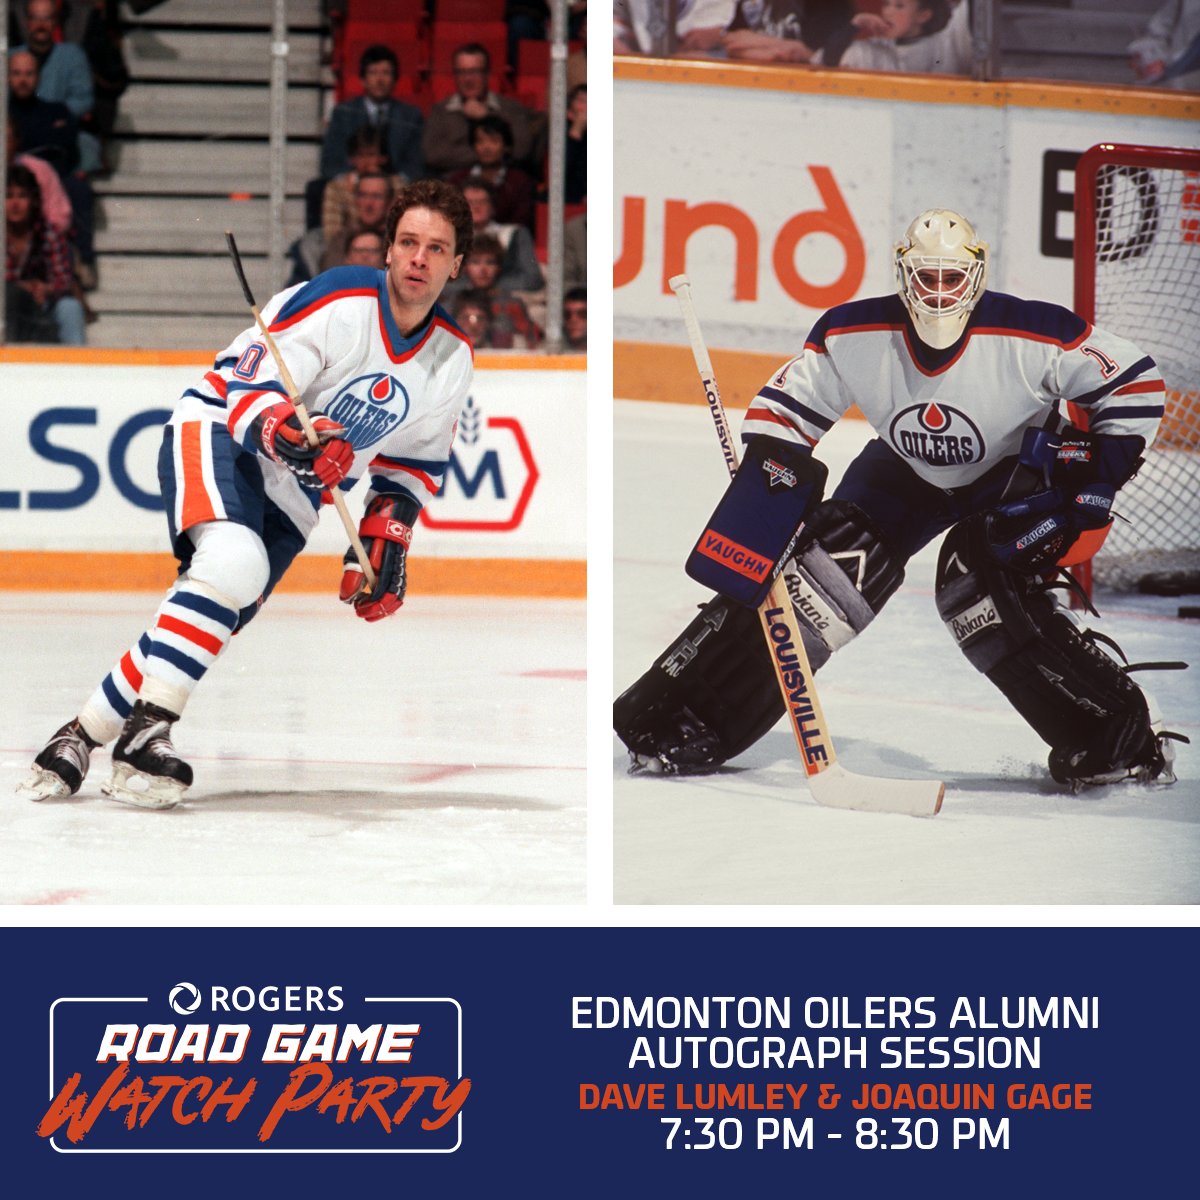 ✍️ ALUMNI UPDATE!! ✍️ @EdmontonOilers alumni Dave Lumley & Joaquin Gage will be signing autographs at tomorrow's @Rogers Road Game Watch Party! Limited tickets remain, get yours before they're gone! 🎫: EdmontonOilers.com/WatchParty